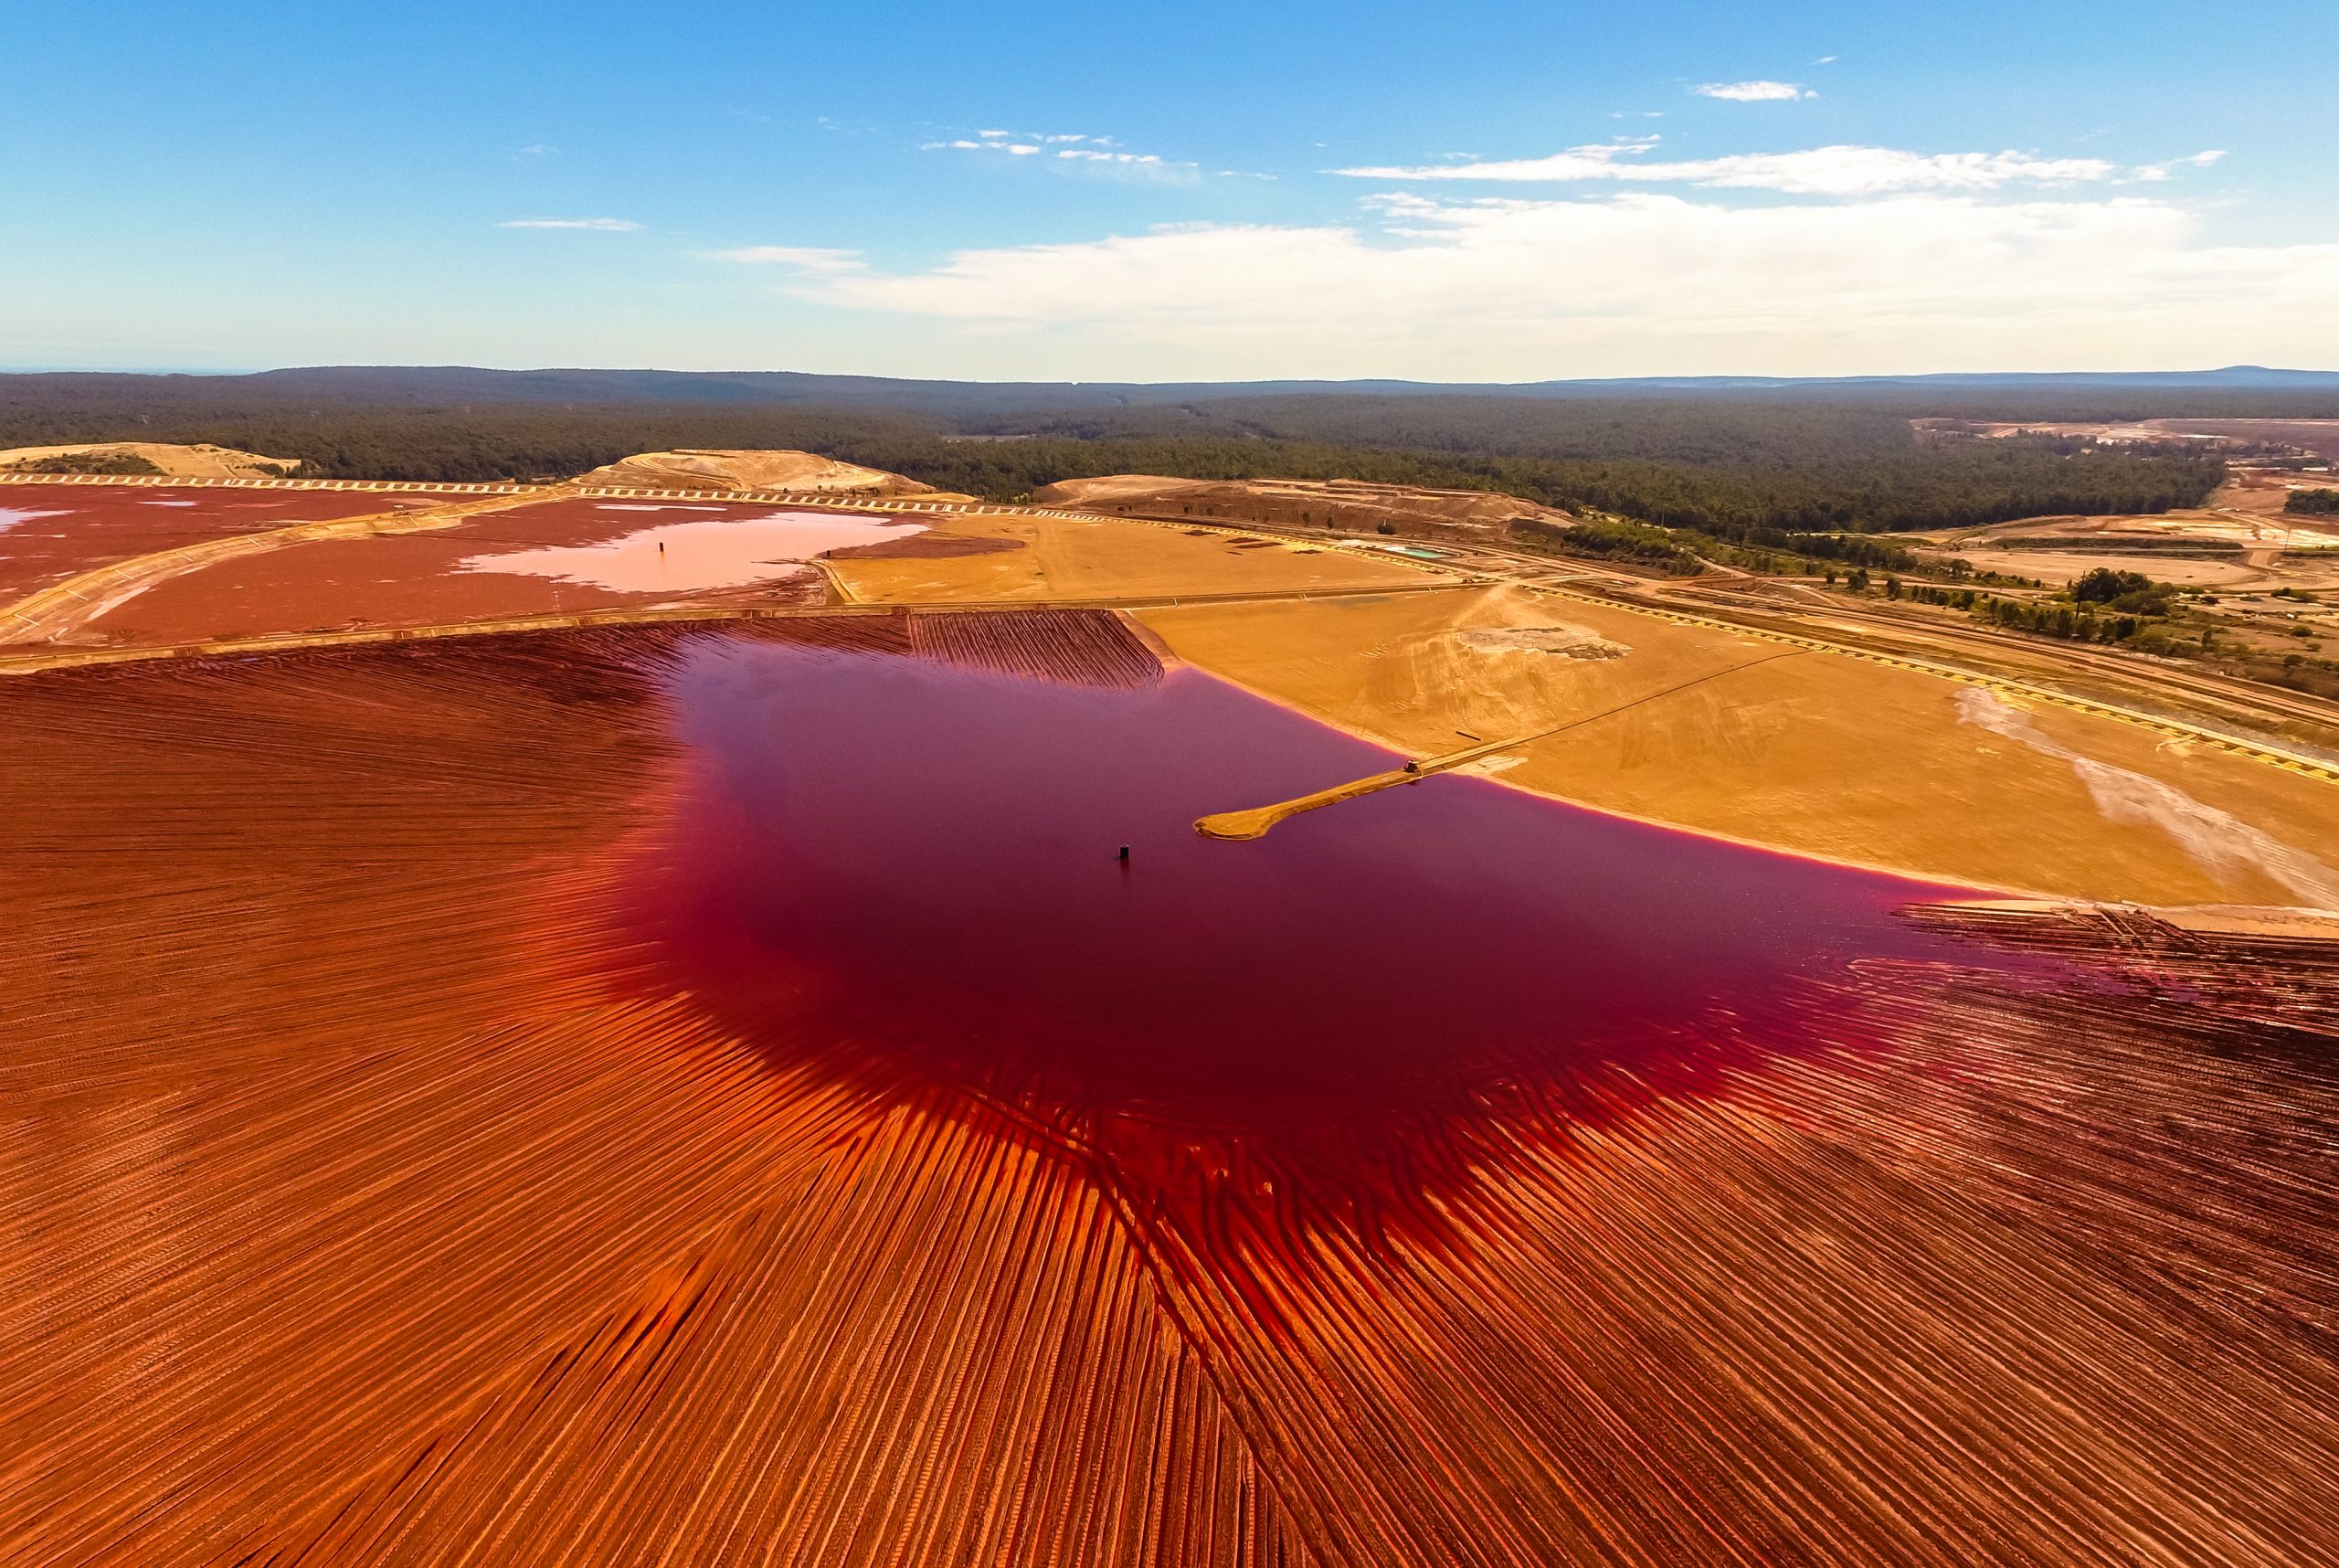 VODCAST – Working towards zero harm: Tailings monitoring and Governance in 2021